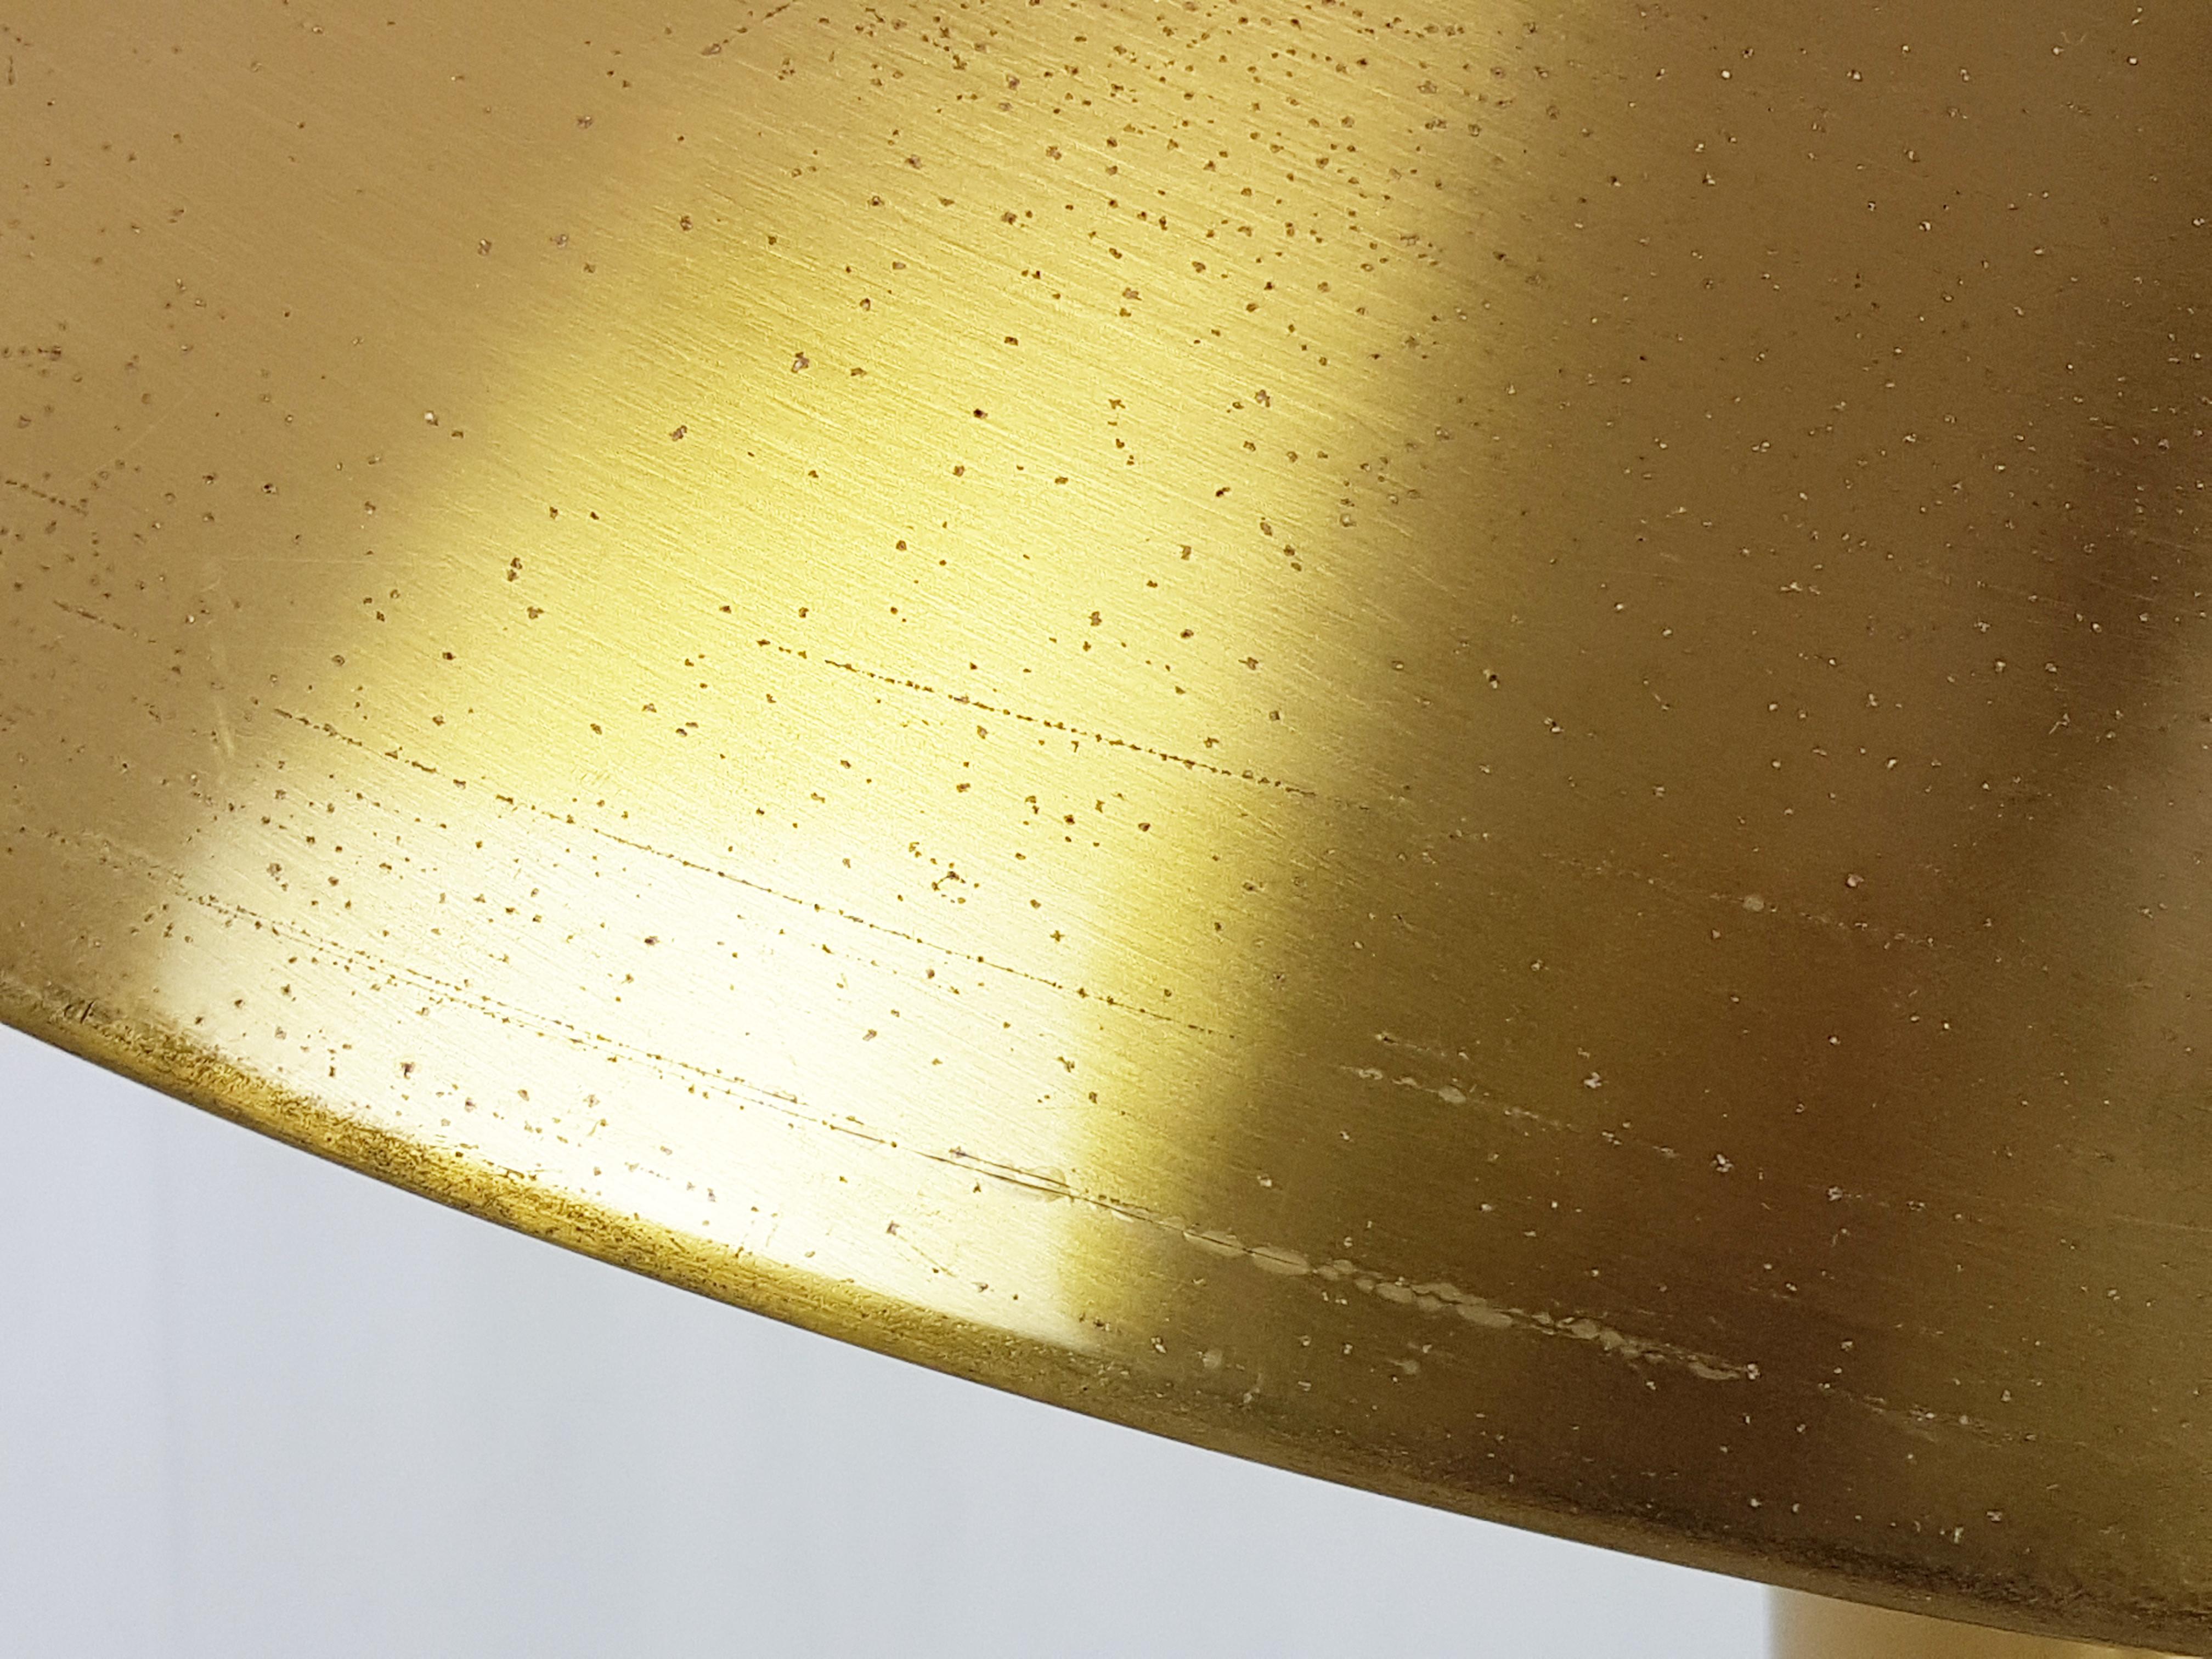 Brushed Brass Vaga Table Lamp by Franco Mirenzi for Valenti, 1978 For Sale 1